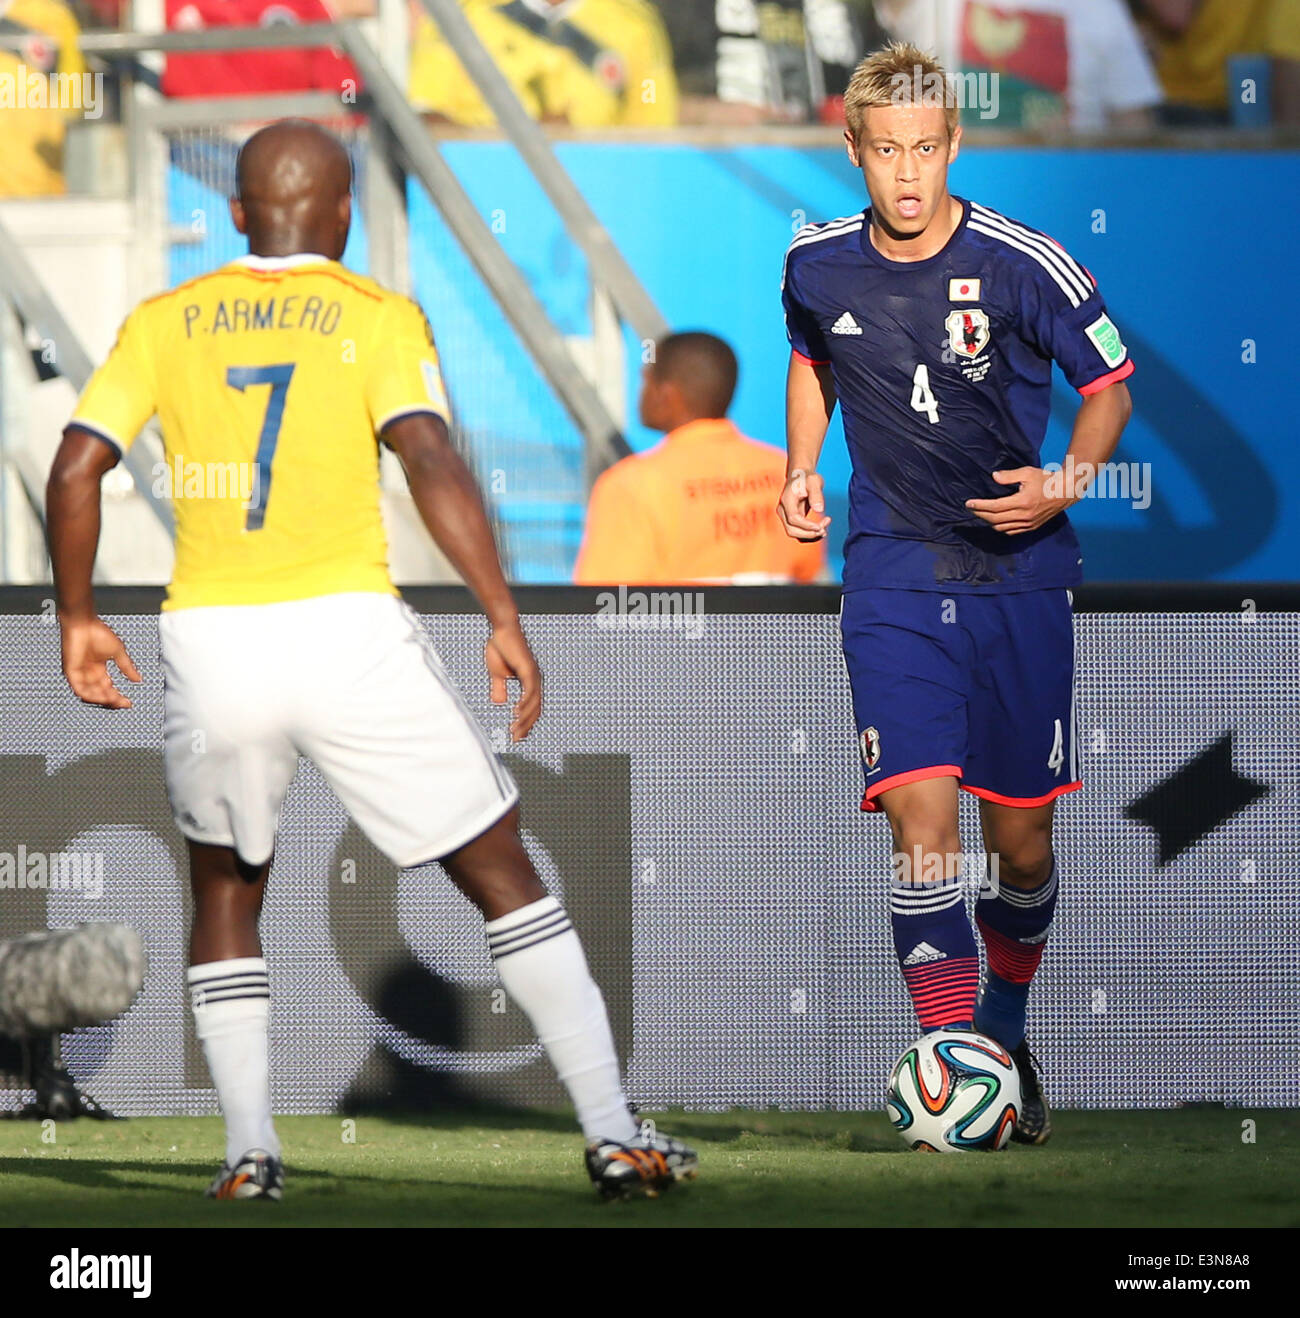 Cuiaba, Brazil. 24th June, 2014. Japan's Keisuke Honda controls the ball during a Group C match between Japan and Colombia of 2014 FIFA World Cup at the Arena Pantanal Stadium in Cuiaba, Brazil, June 24, 2014. © Li Ming/Xinhua/Alamy Live News Stock Photo